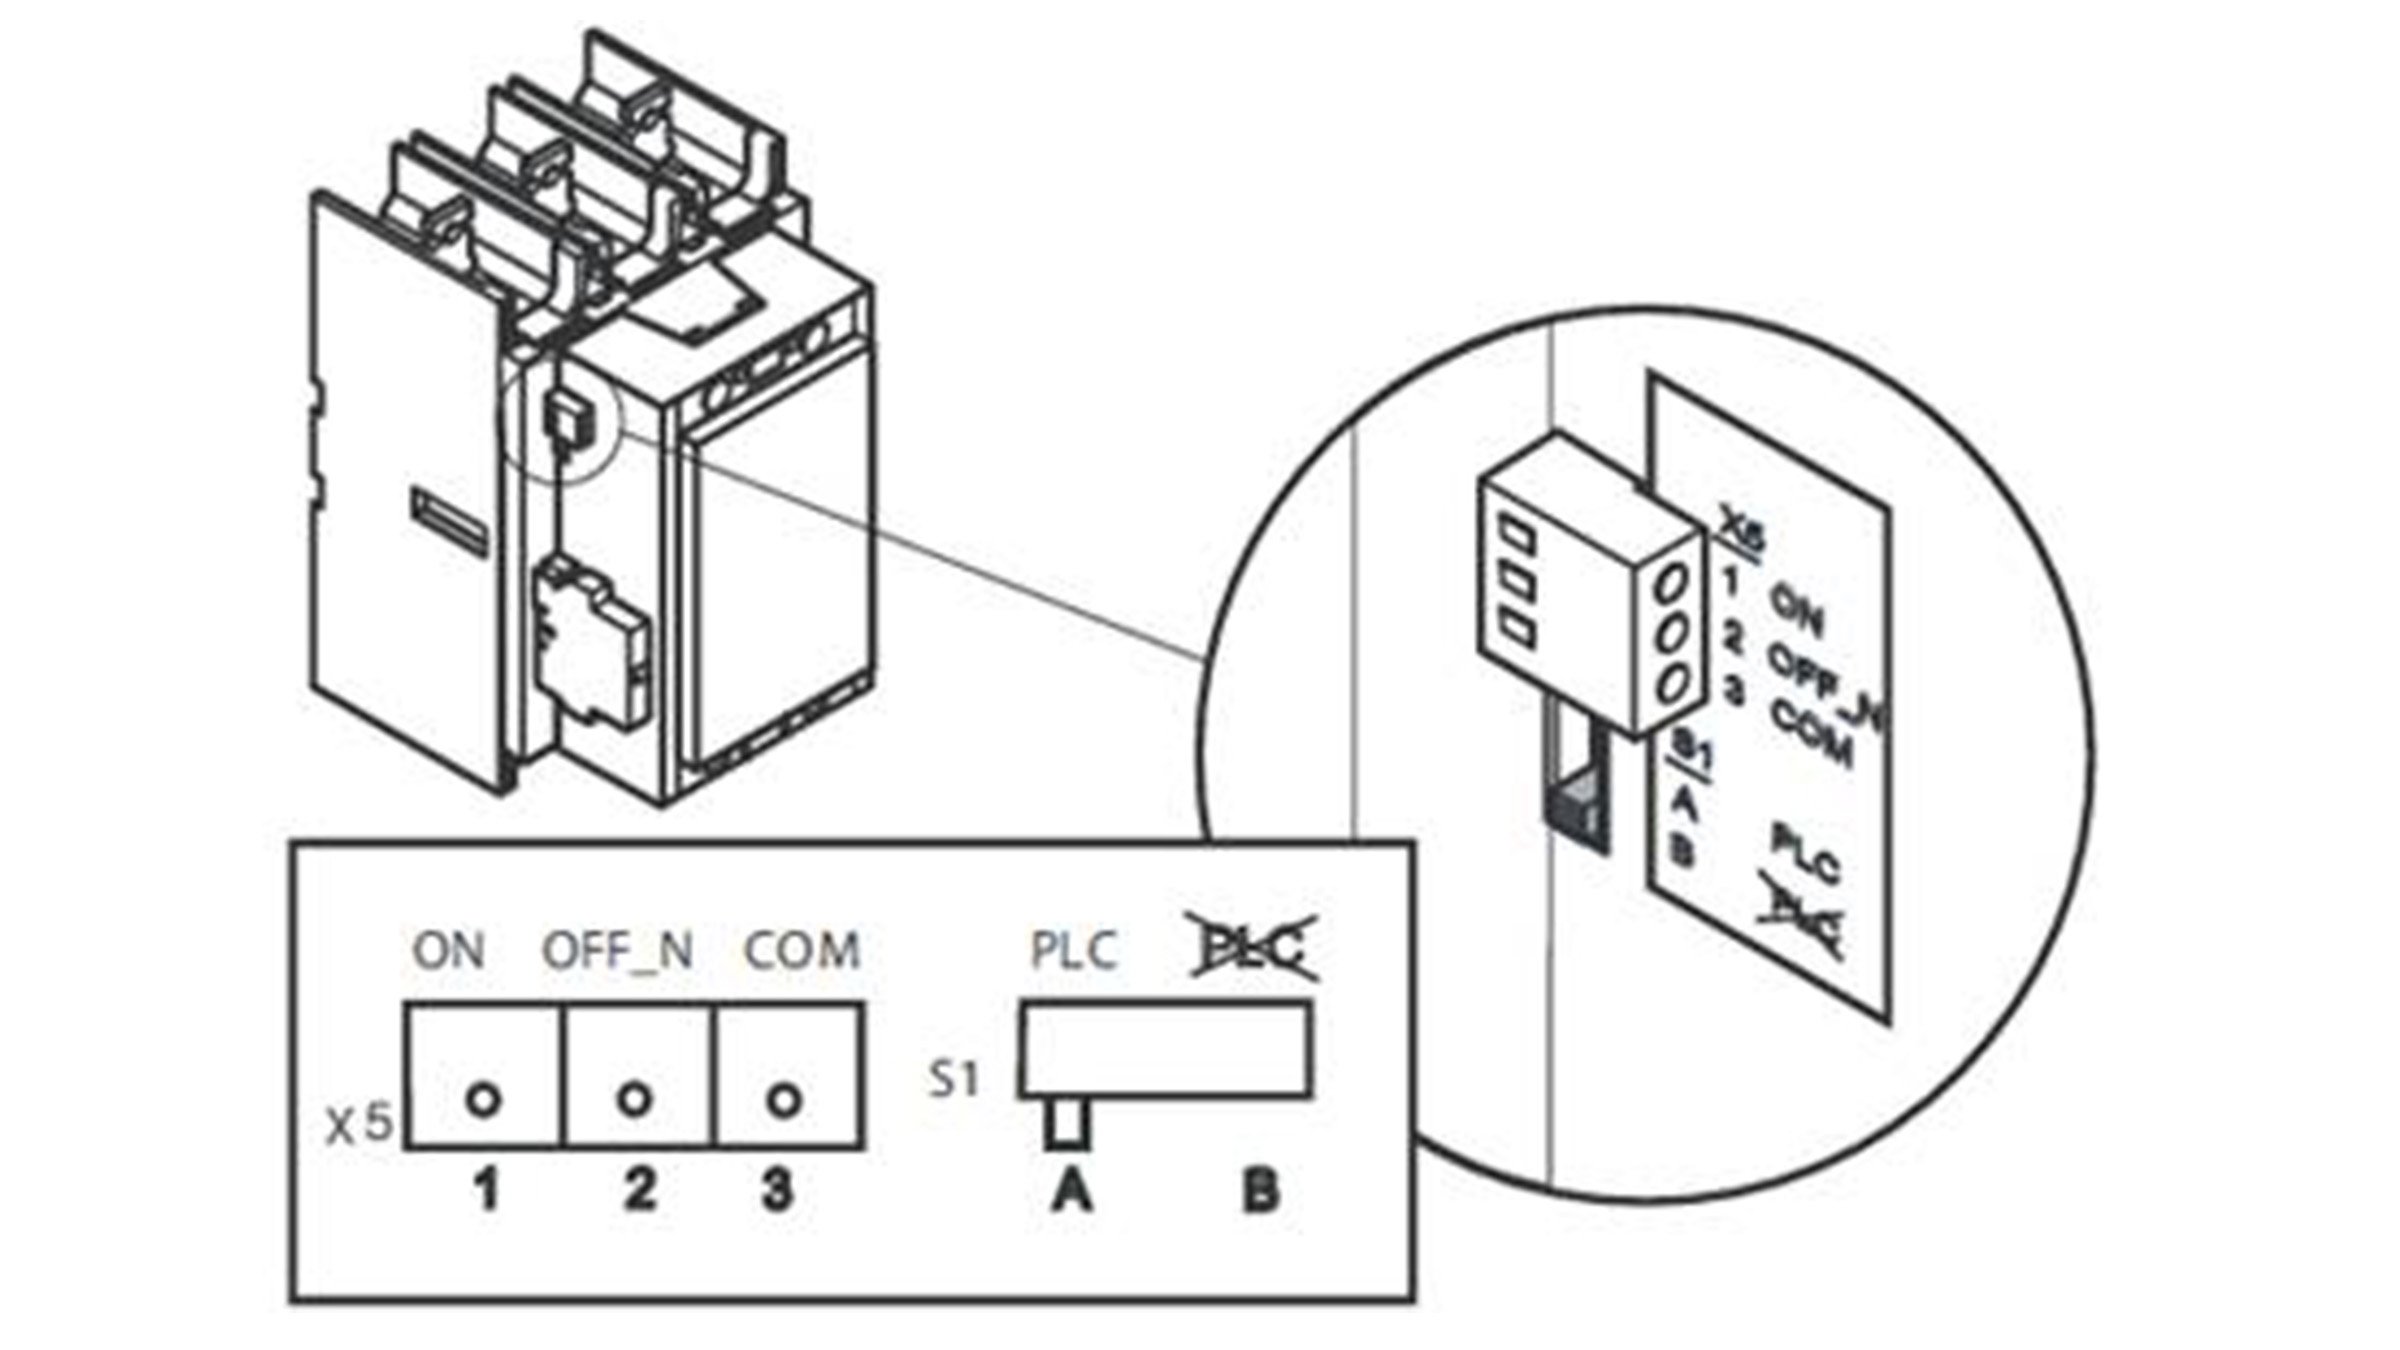 Sprecher & Schuh Series CA9 control switch S1 location on face of contactor